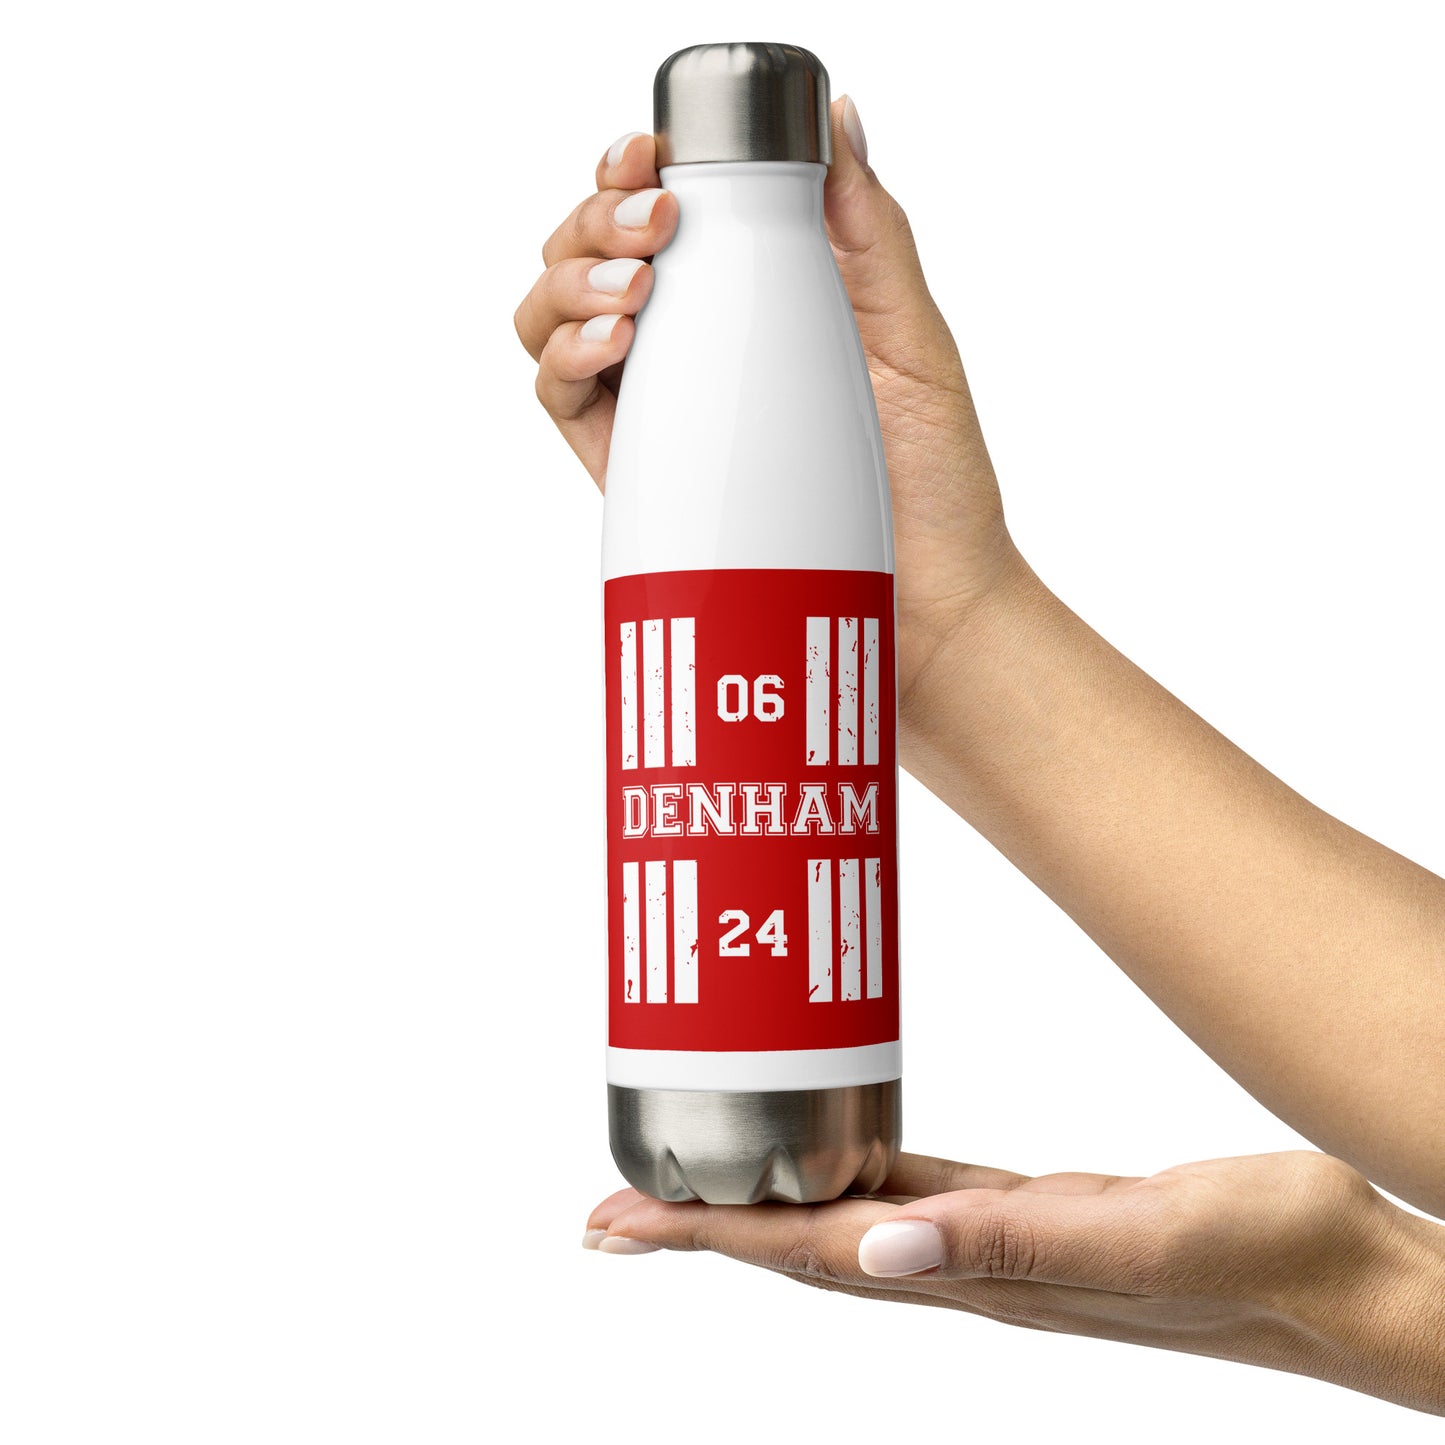 The Denham Aerodrome runway designator water bottle features a red print with the airport's name and designator framed by stylised threshold markings showing through.